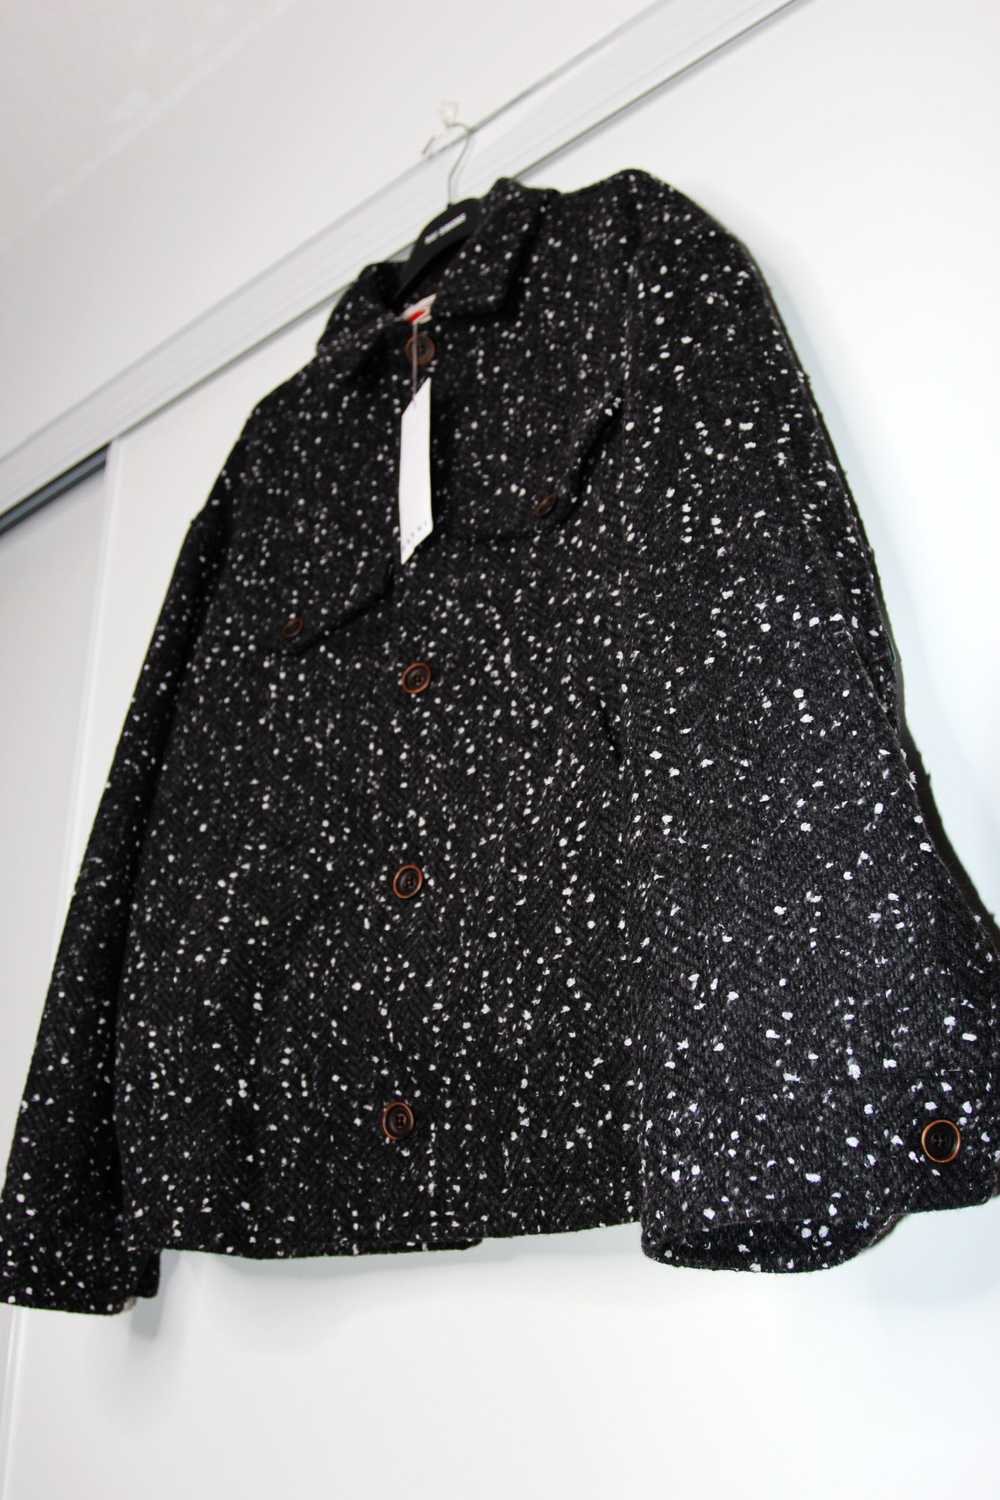 BNWT AW21 MARNI SPECKLED JACKET 46 - image 6